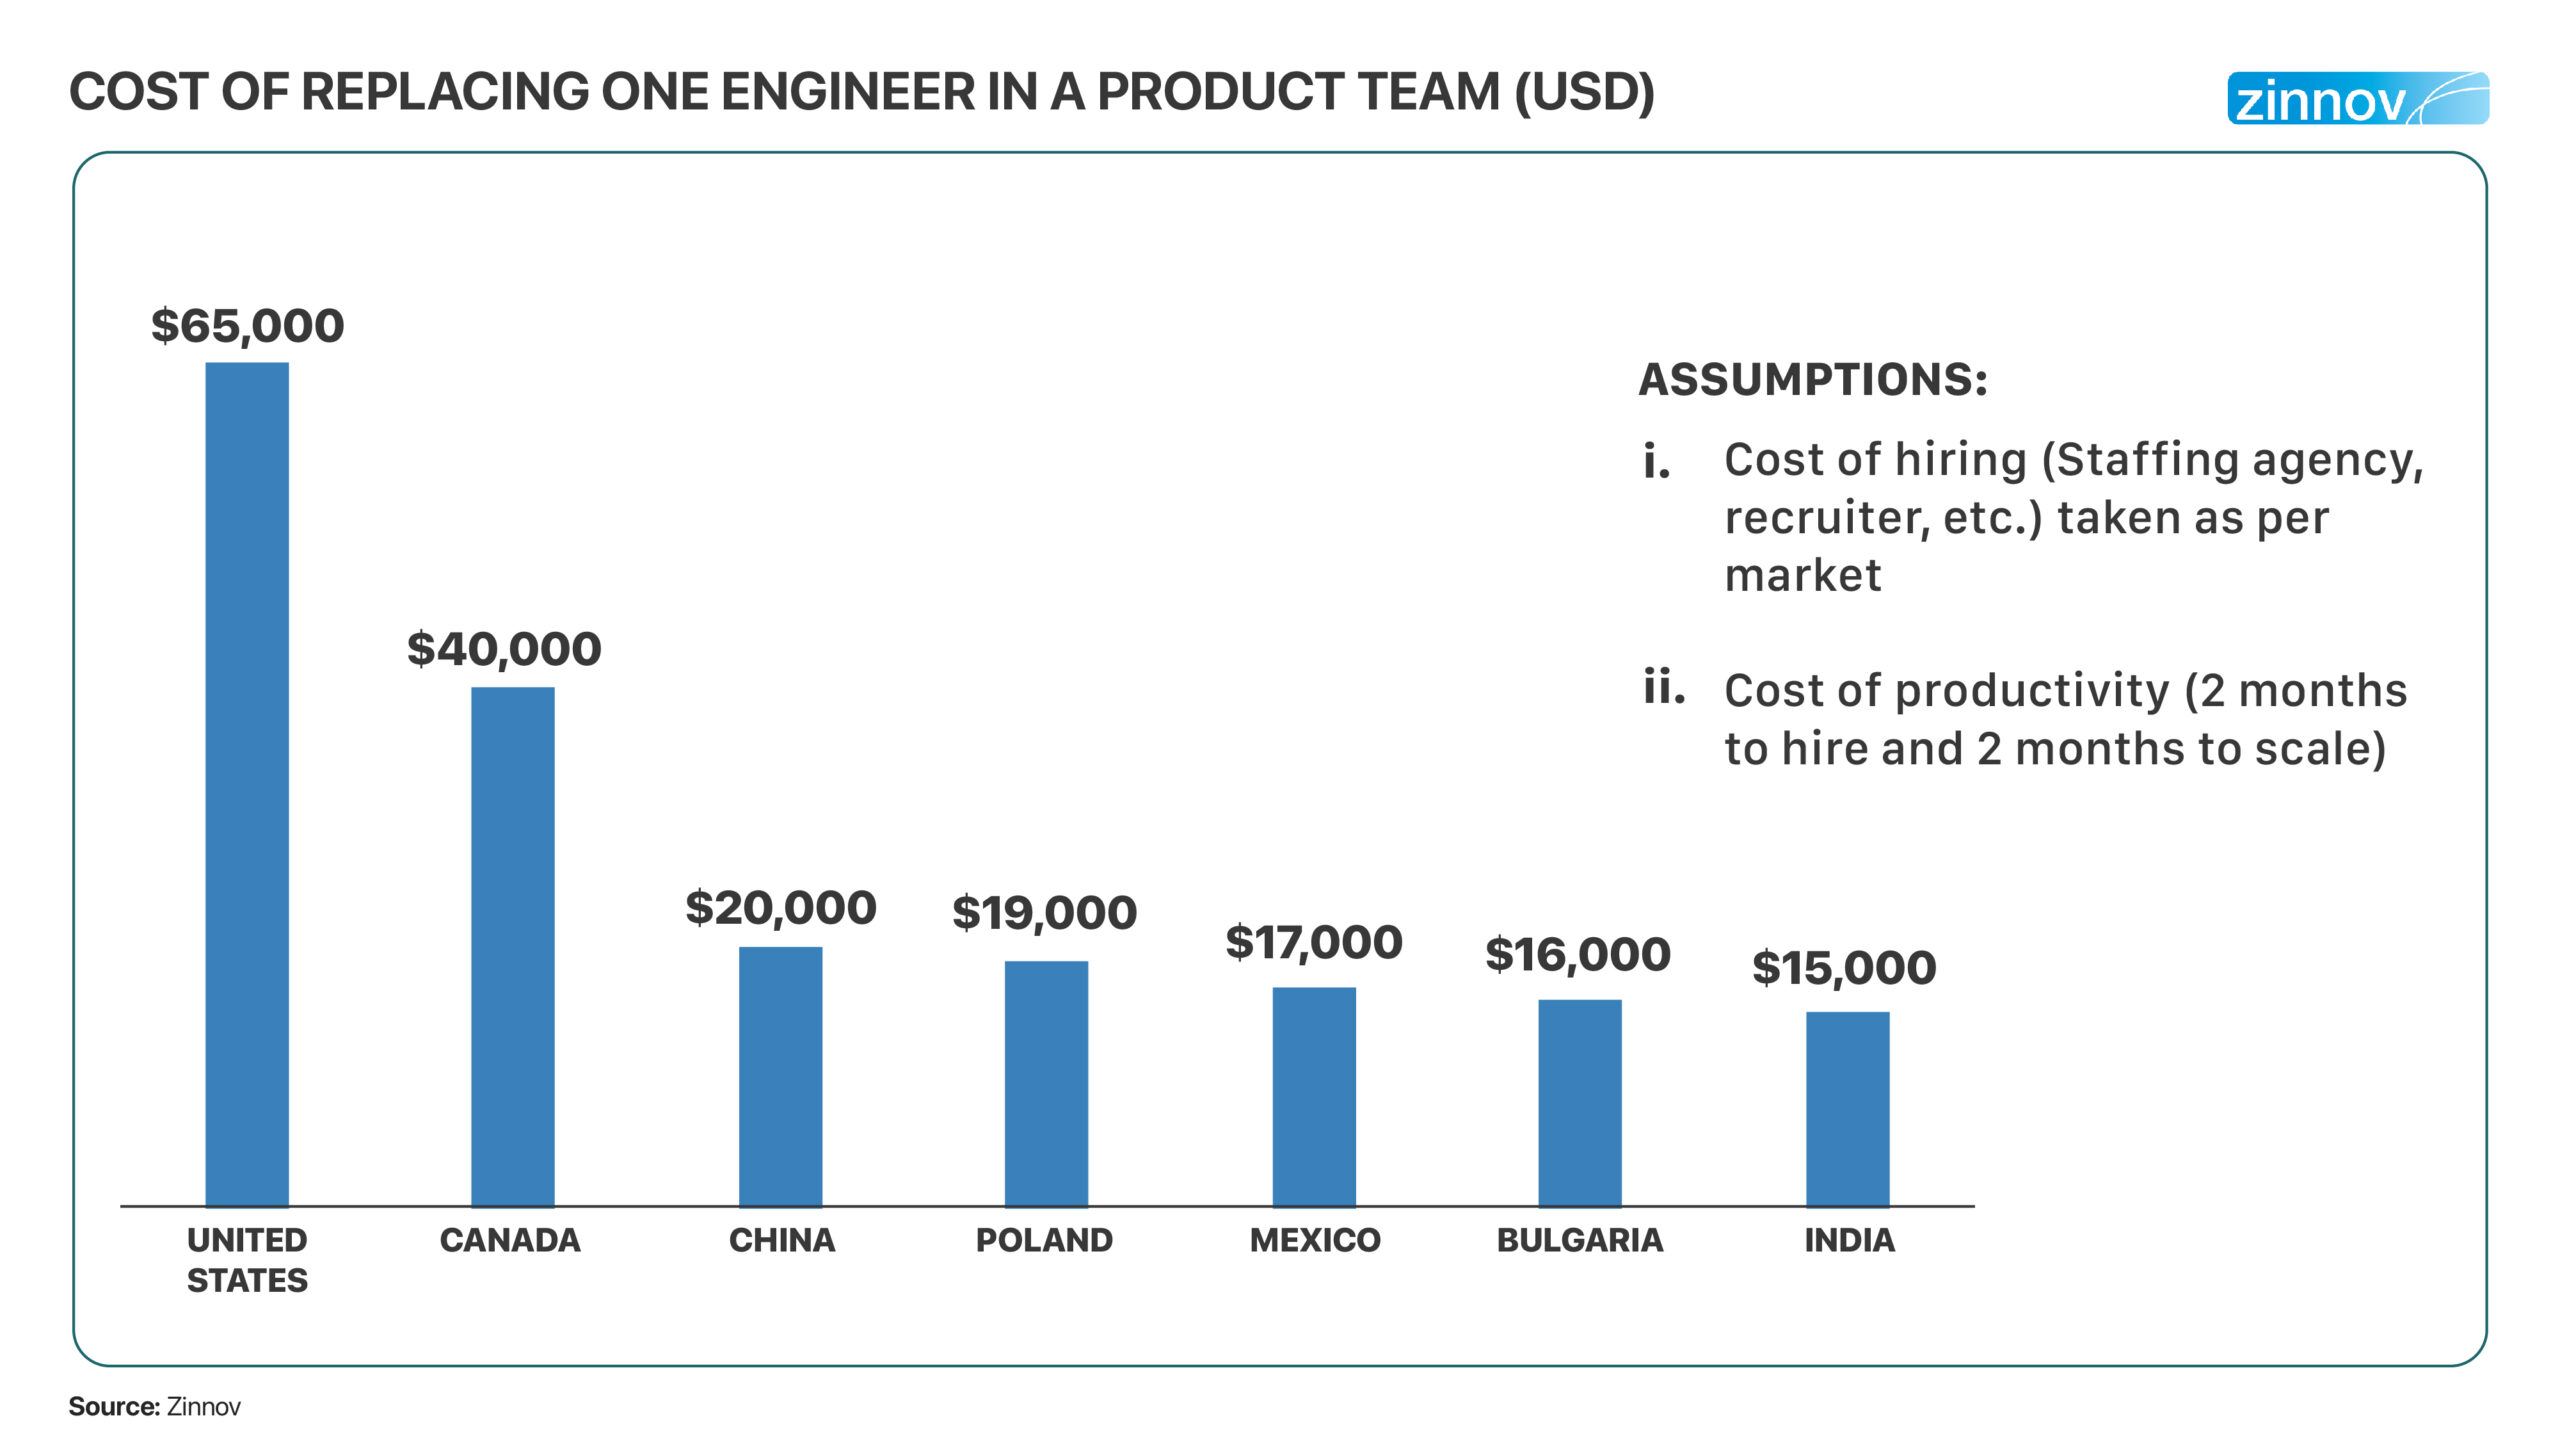 Cost of replacing one engineer in a product team